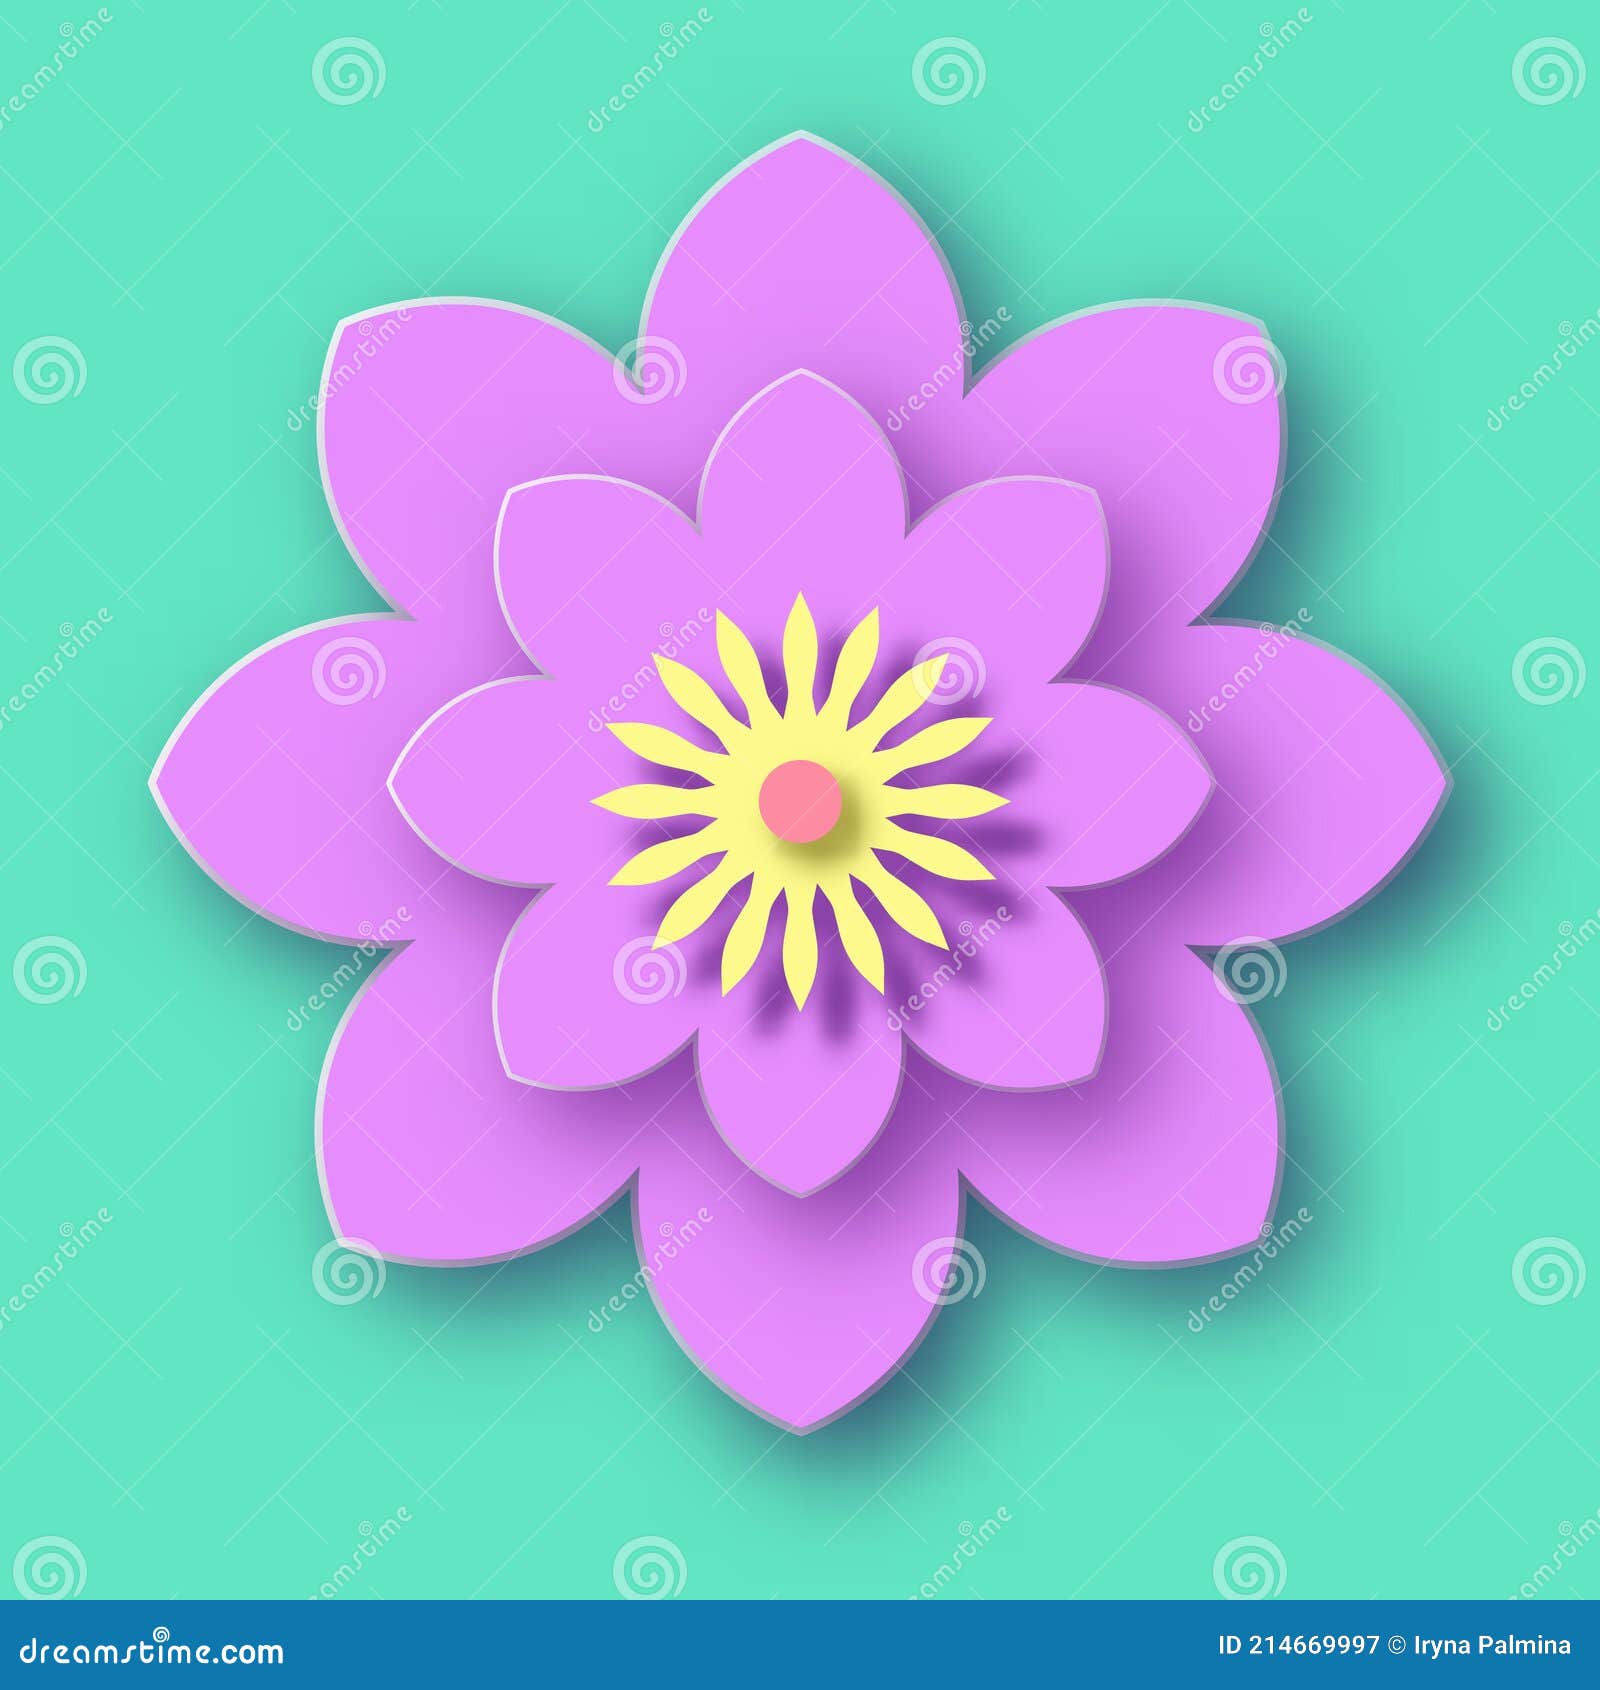 Flower lotus are cut from paper for decorations Vector Image